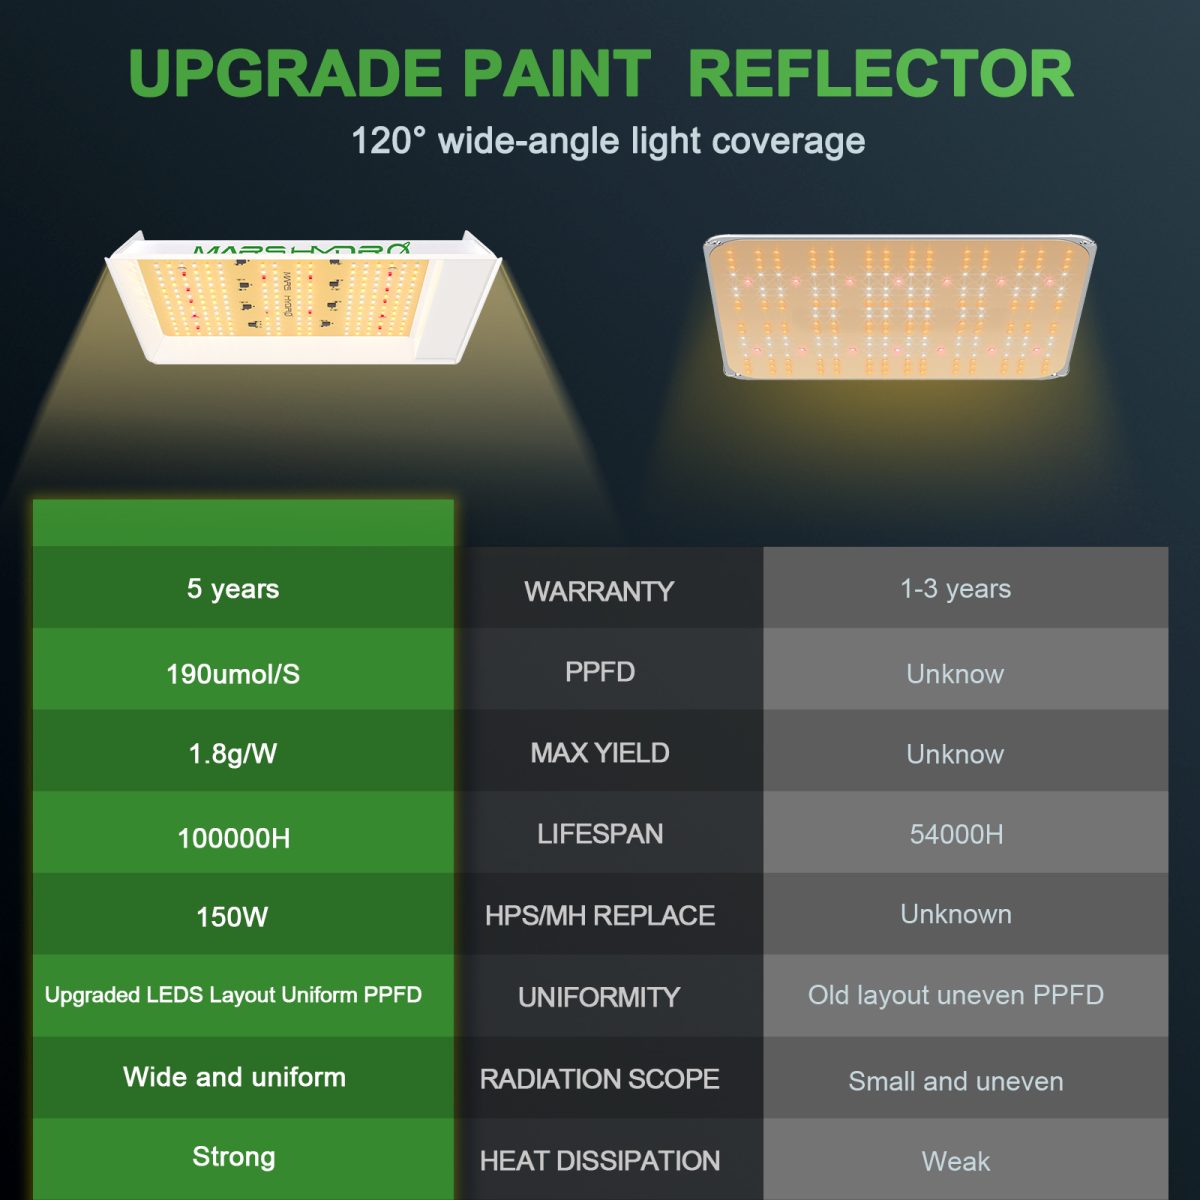 UPGRADE PAINT REFLECTOR 120°wide-angle light coverage